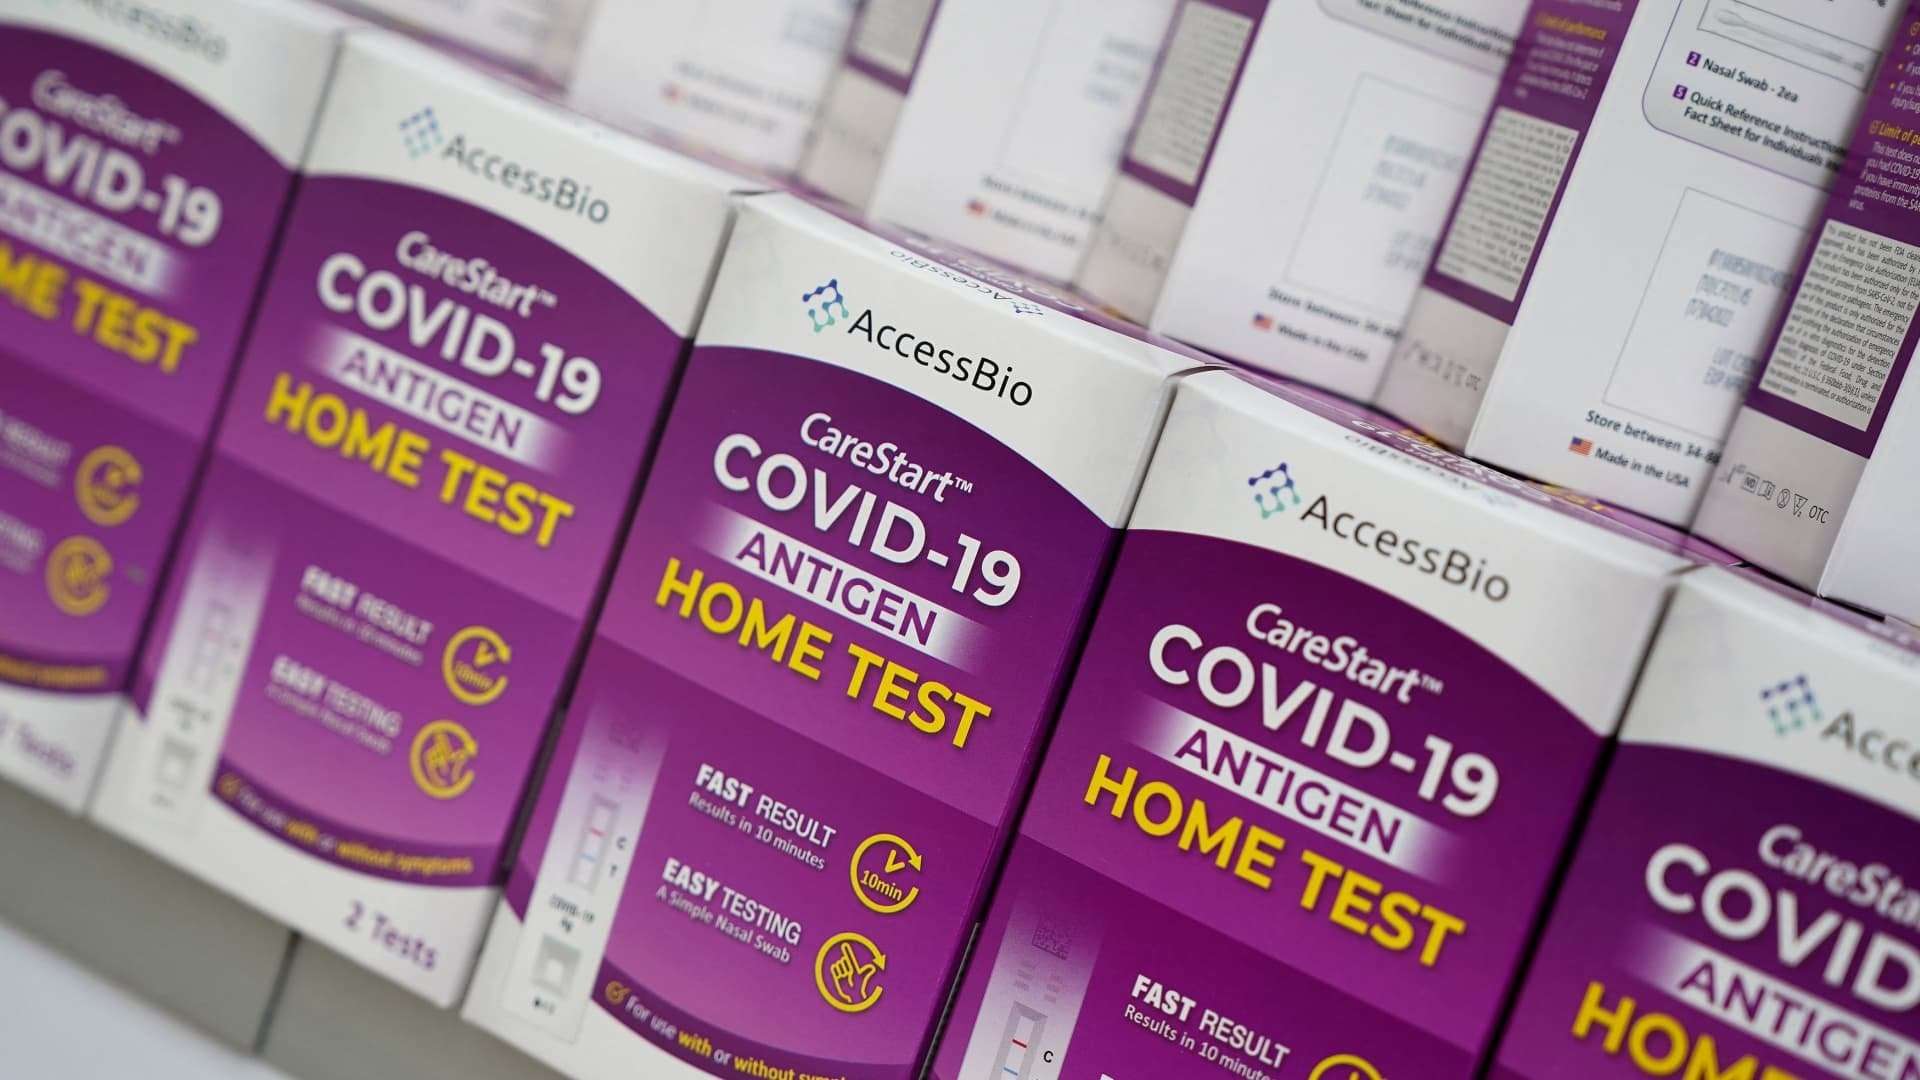 image for U.S. to offer another round of free at-home Covid tests starting Monday